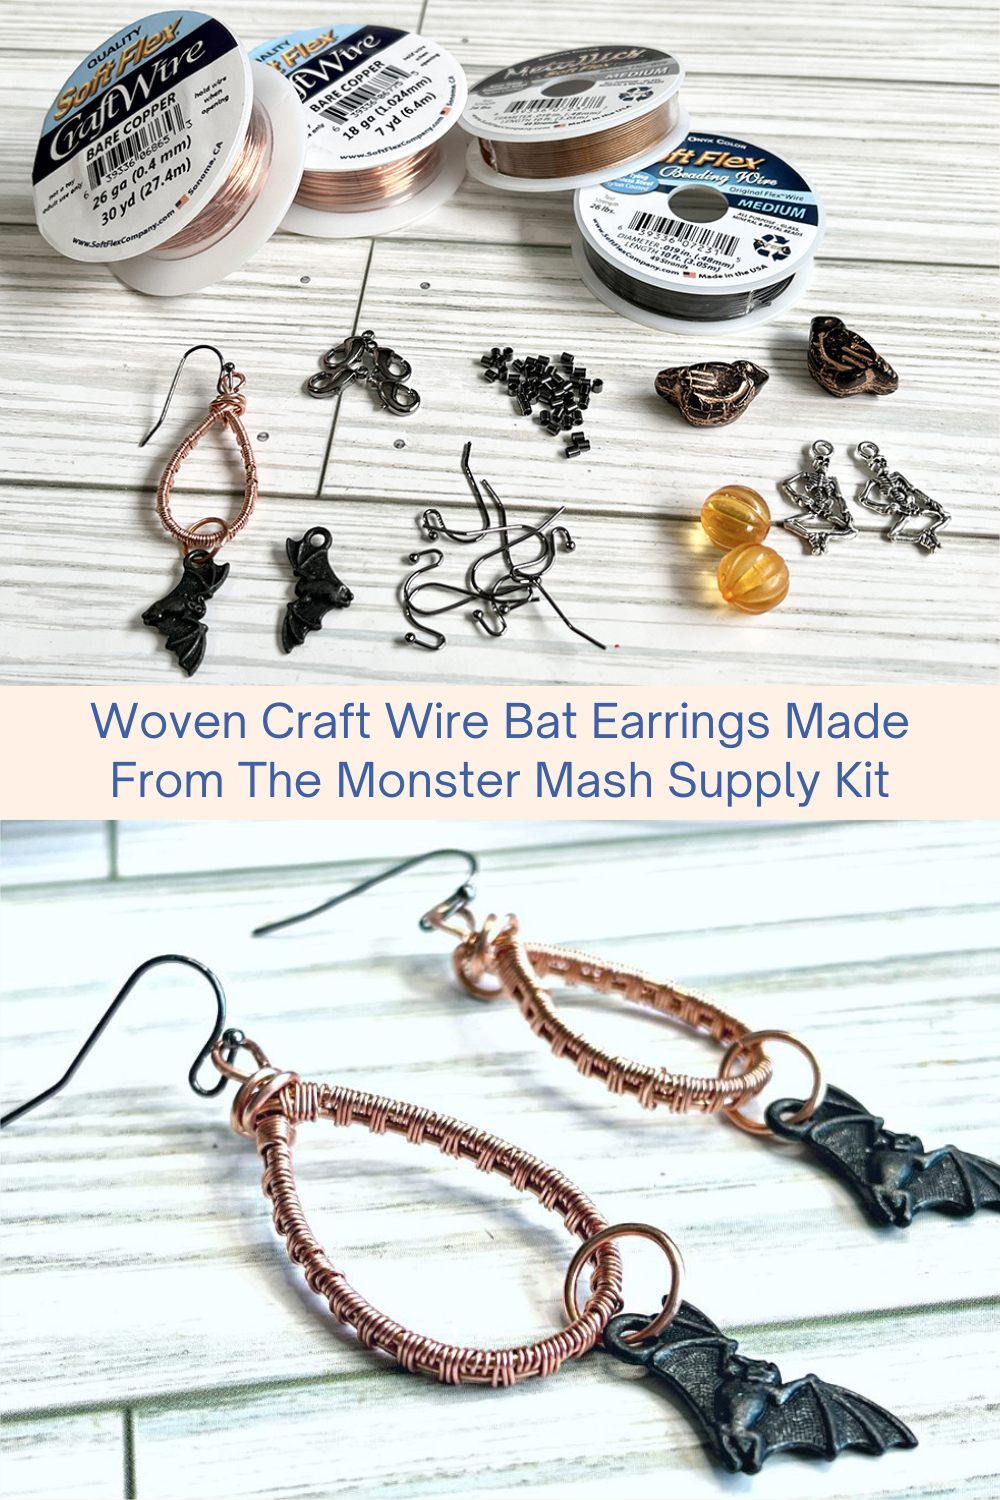 Woven Craft Wire Bat Earrings Made From The Monster Mash Supply Kit Collage